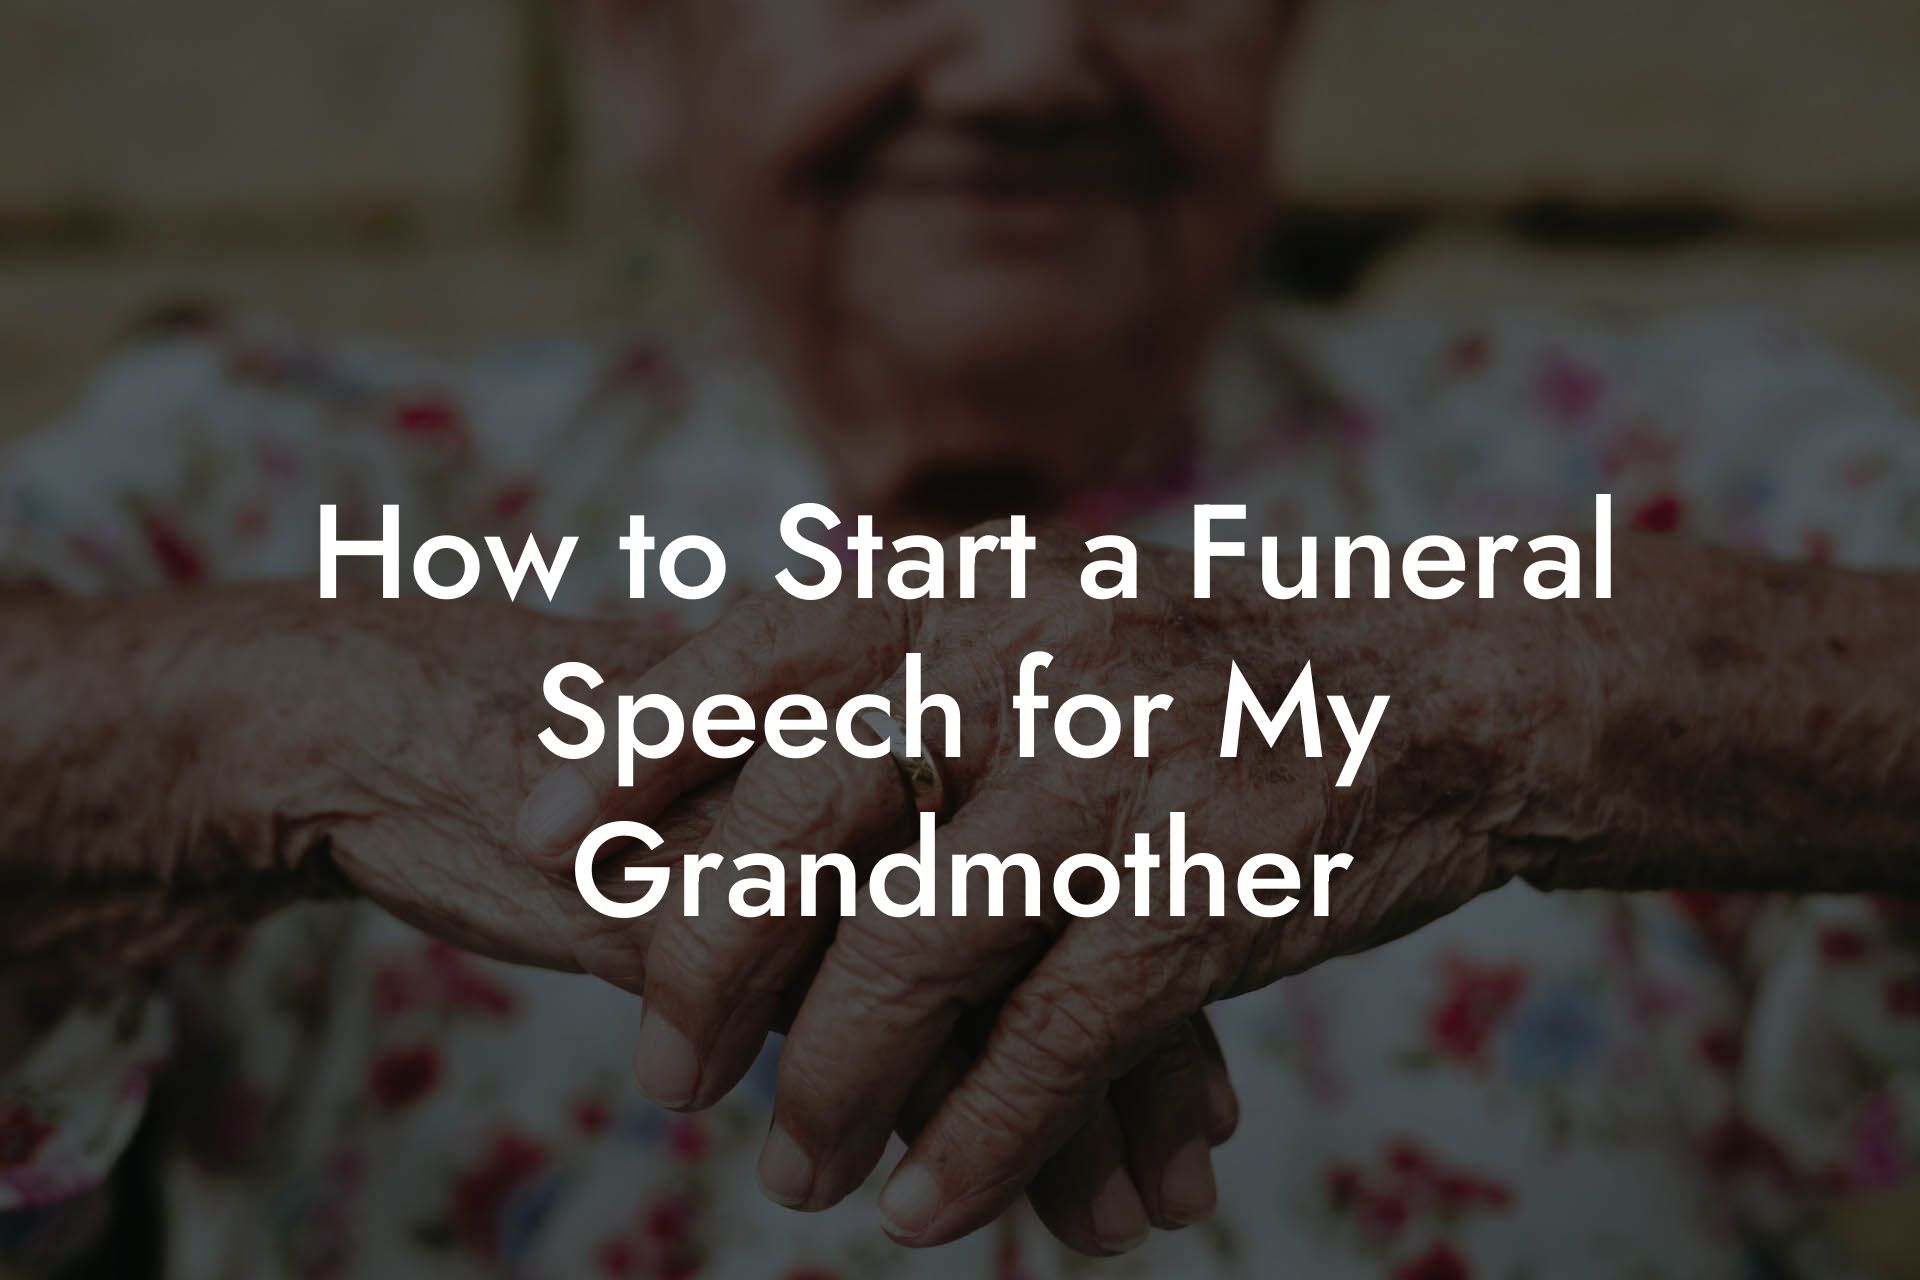 How to Start a Funeral Speech for My Grandmother